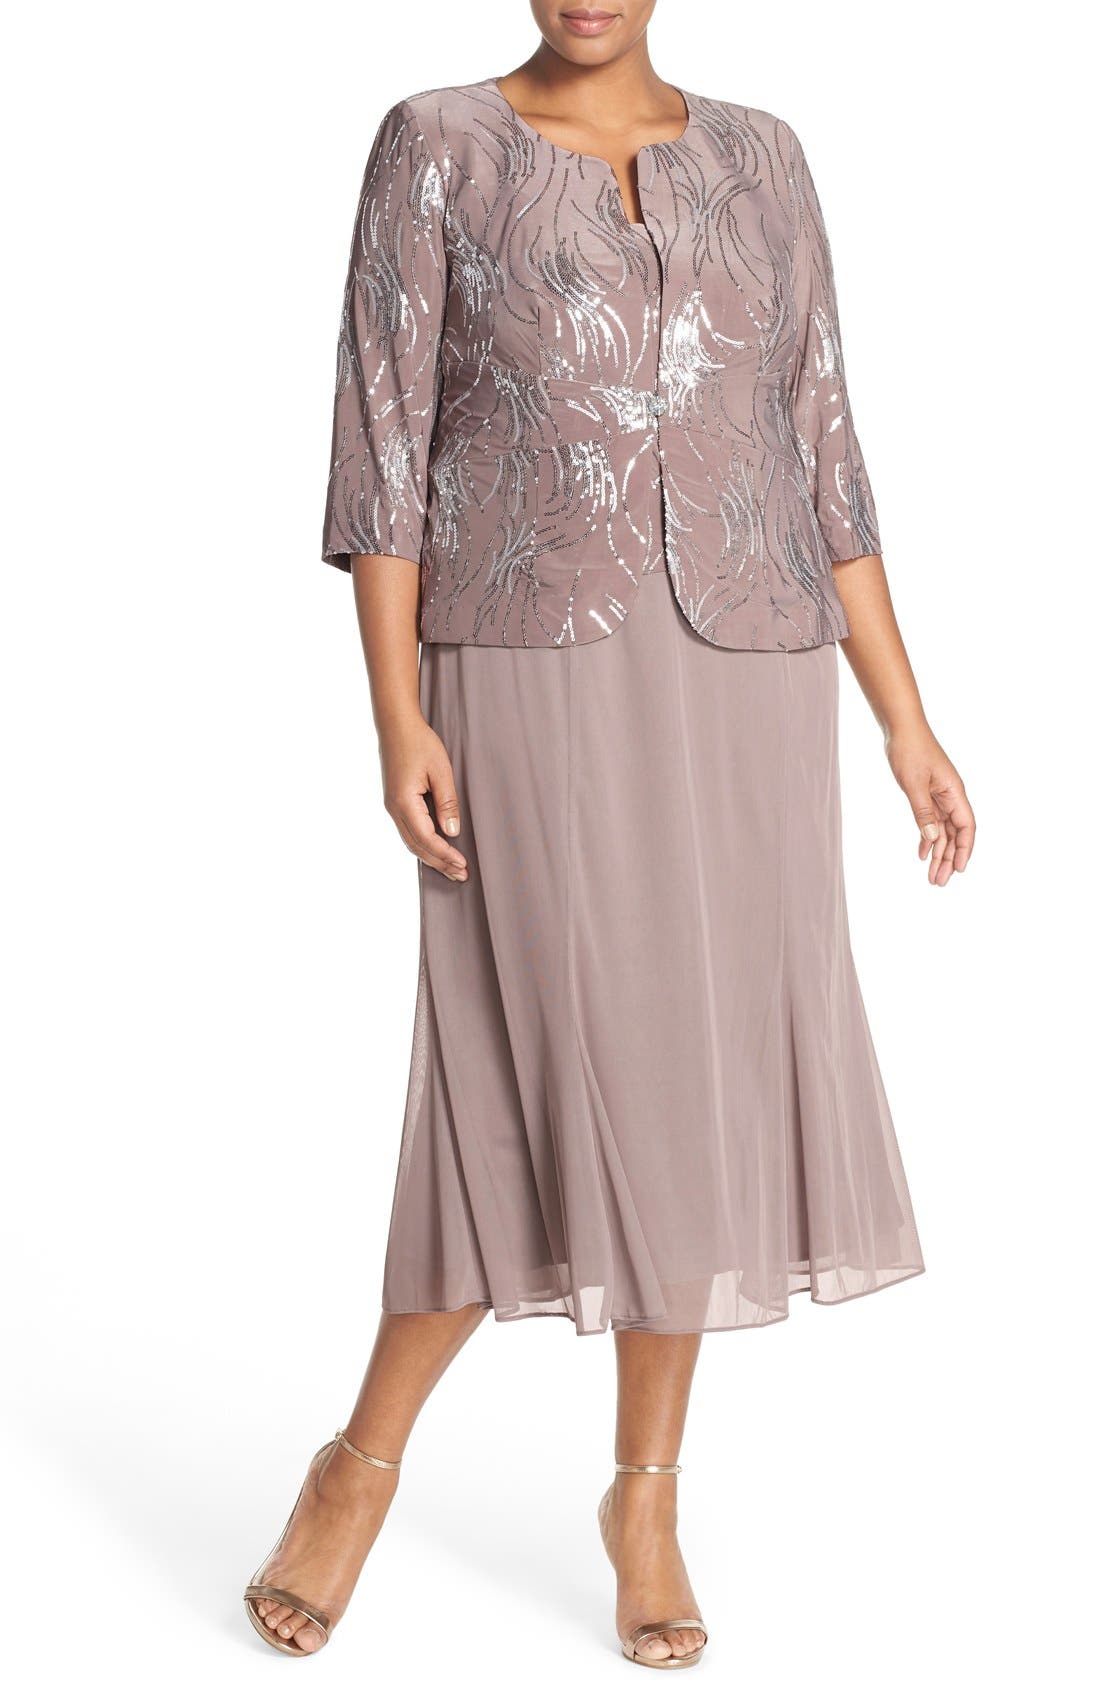 blush mother of the bride dresses plus size